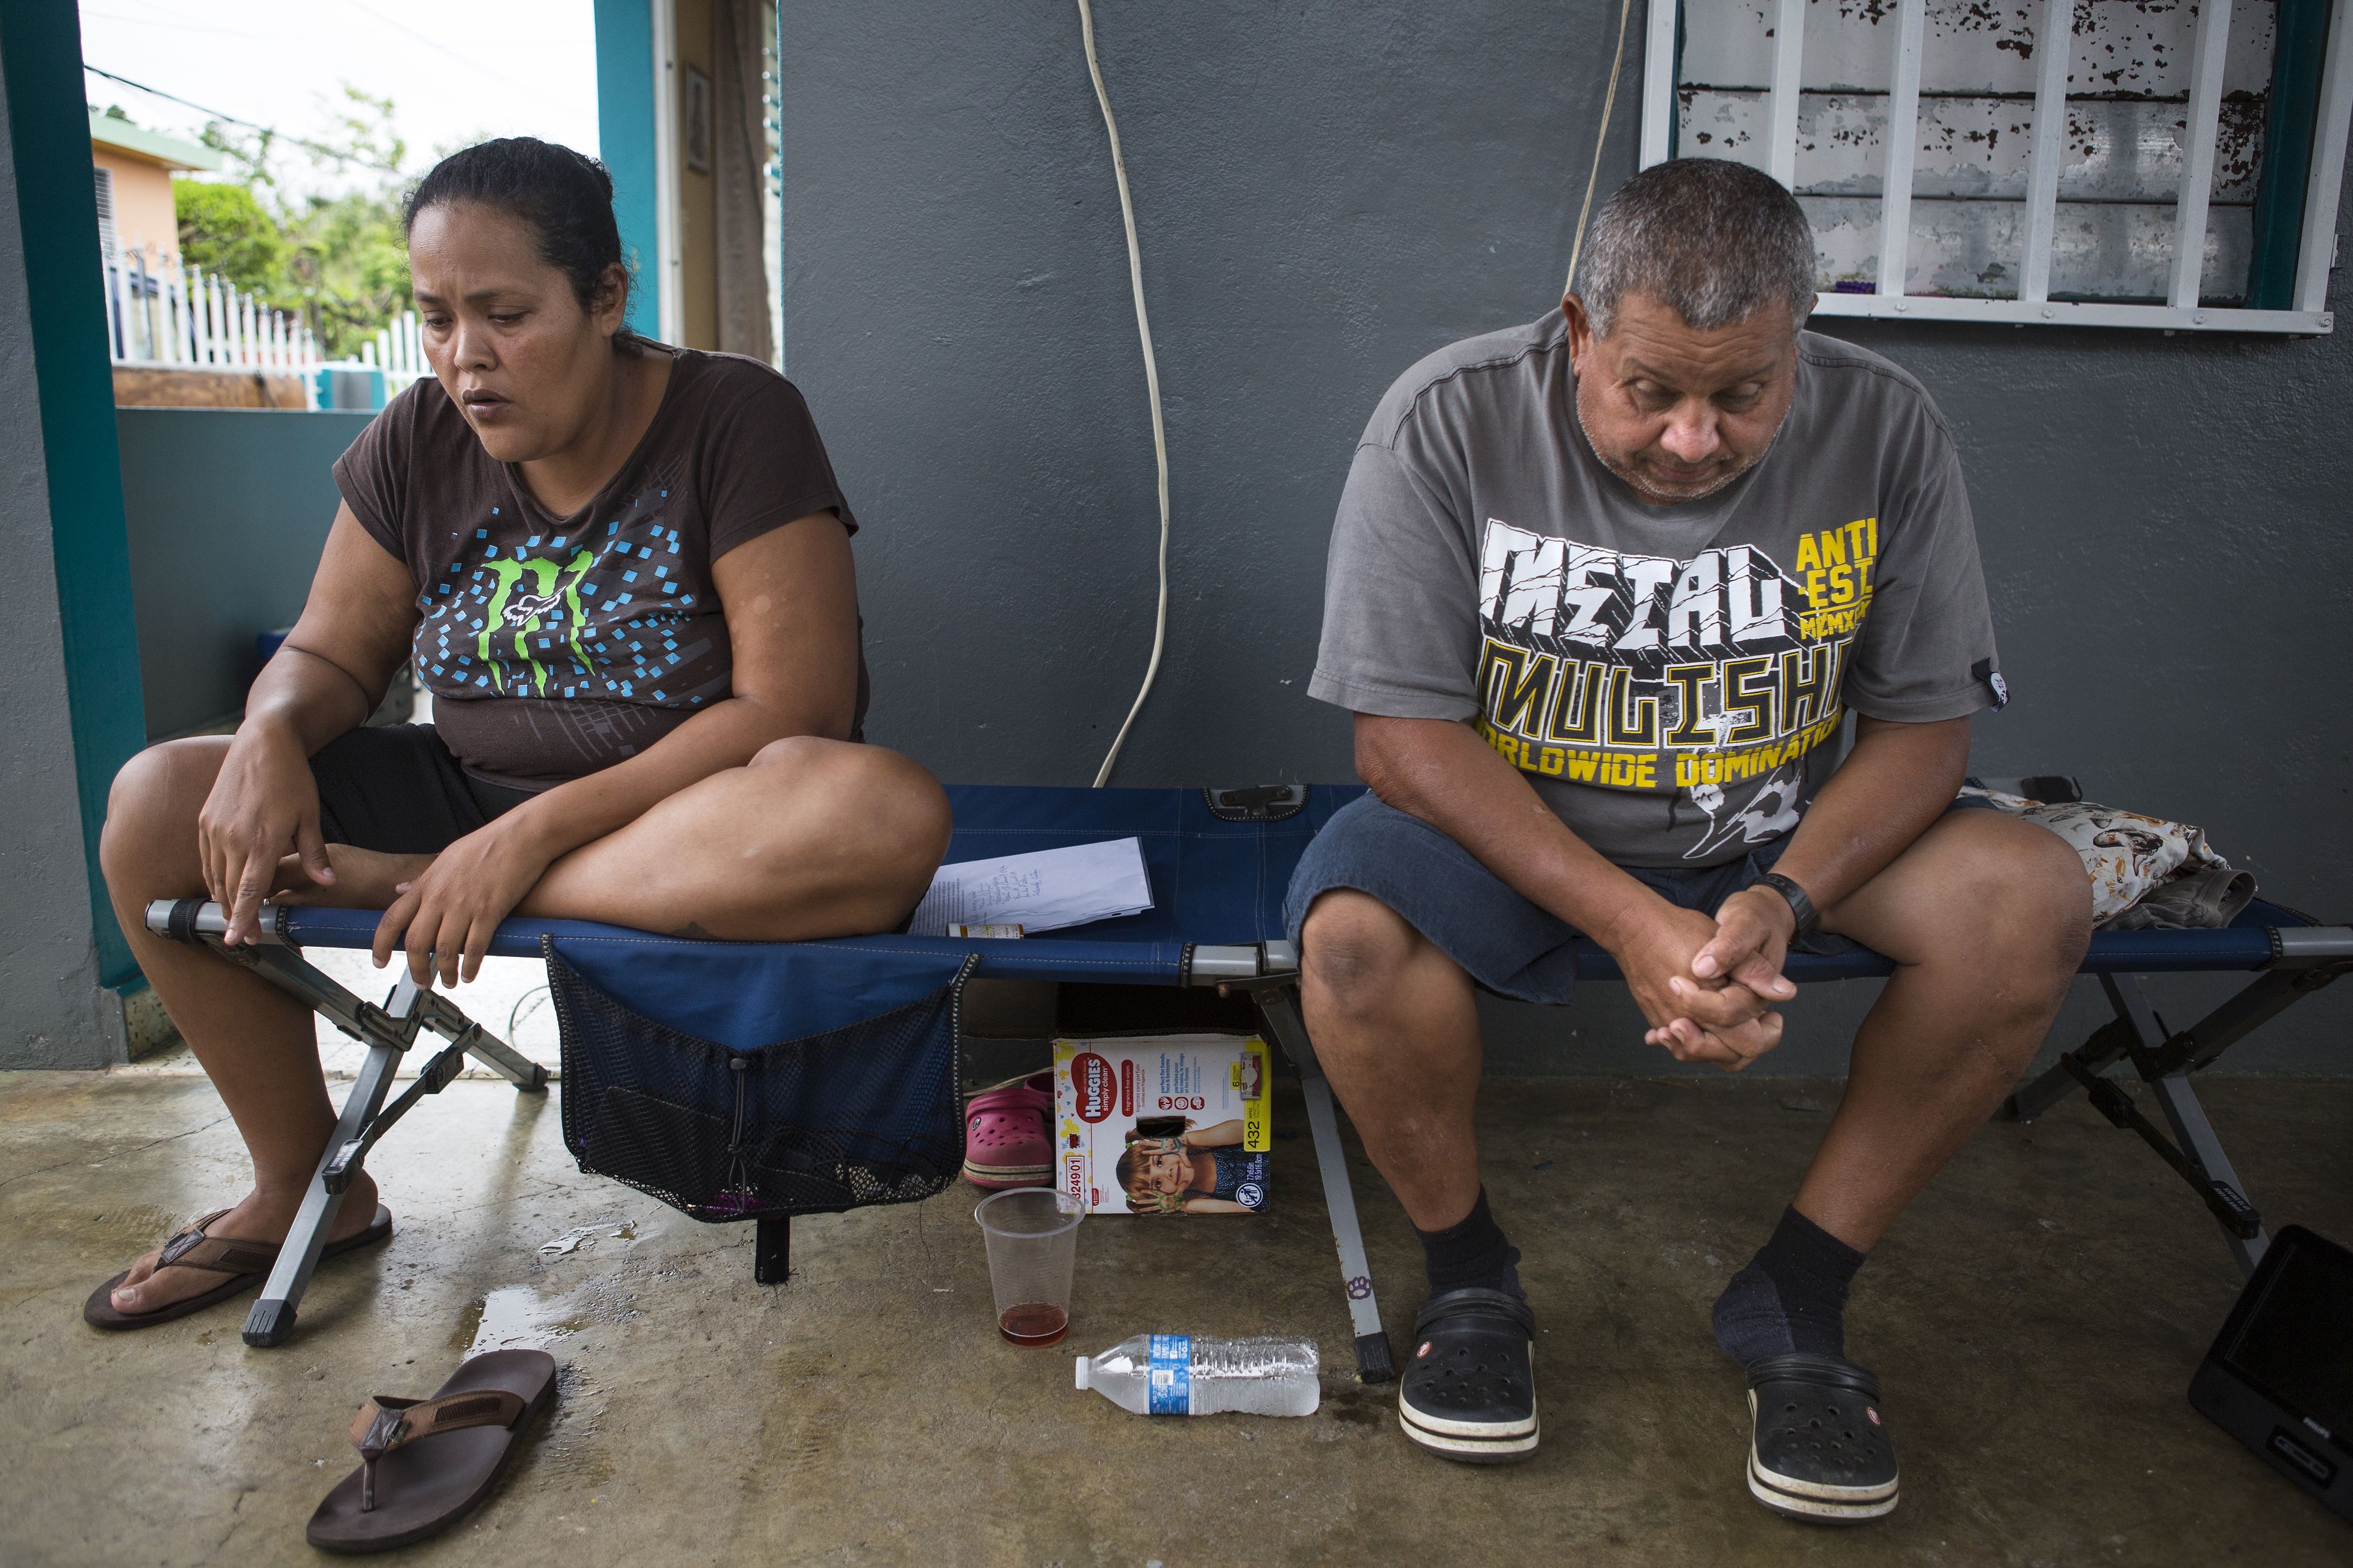 Karen Feliciano, left, and her husband take time to themselves while seated on a folding cot set up on their porch. Image by Ryan Michalesko. Puerto Rico, 2017.